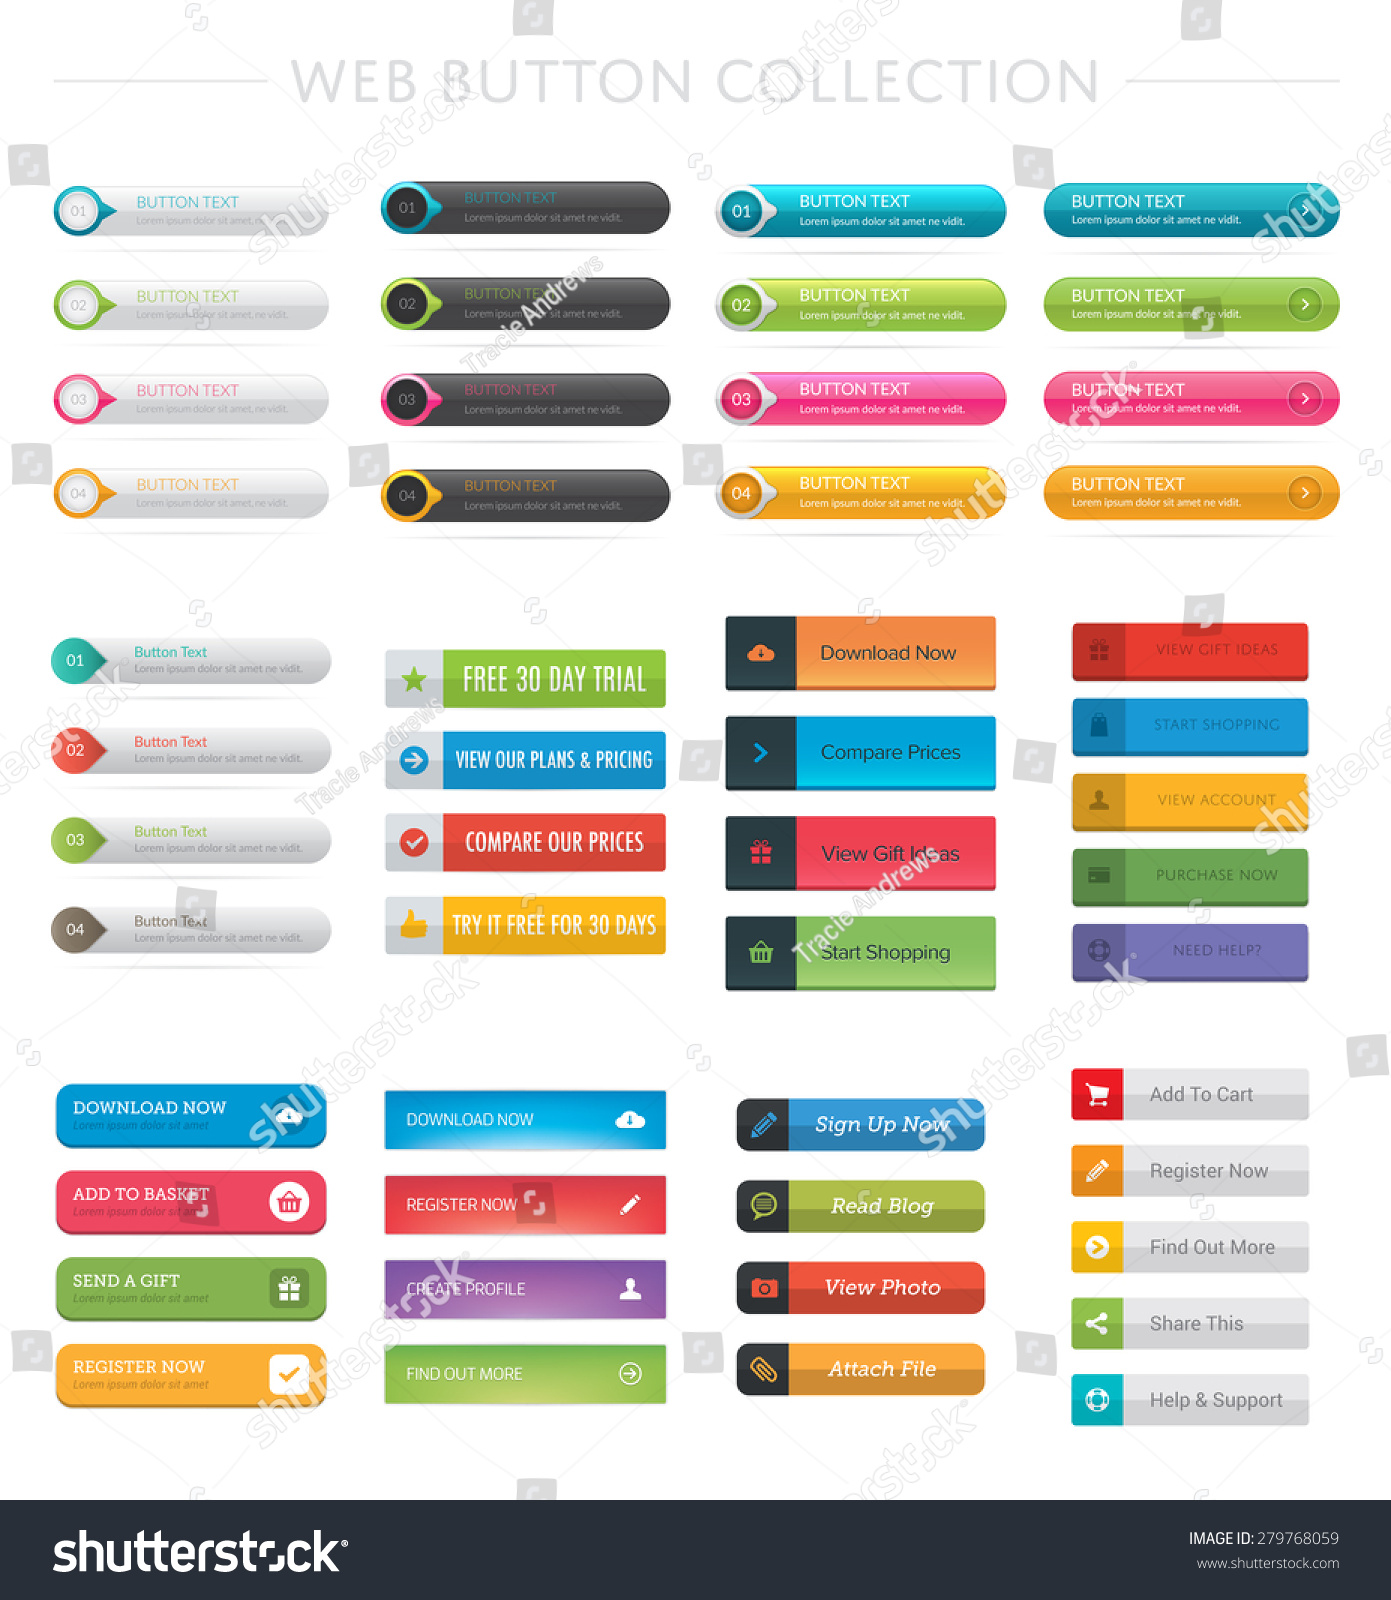 Web Button Collection Stock Vector (Royalty Free) 279768059 | Shutterstock